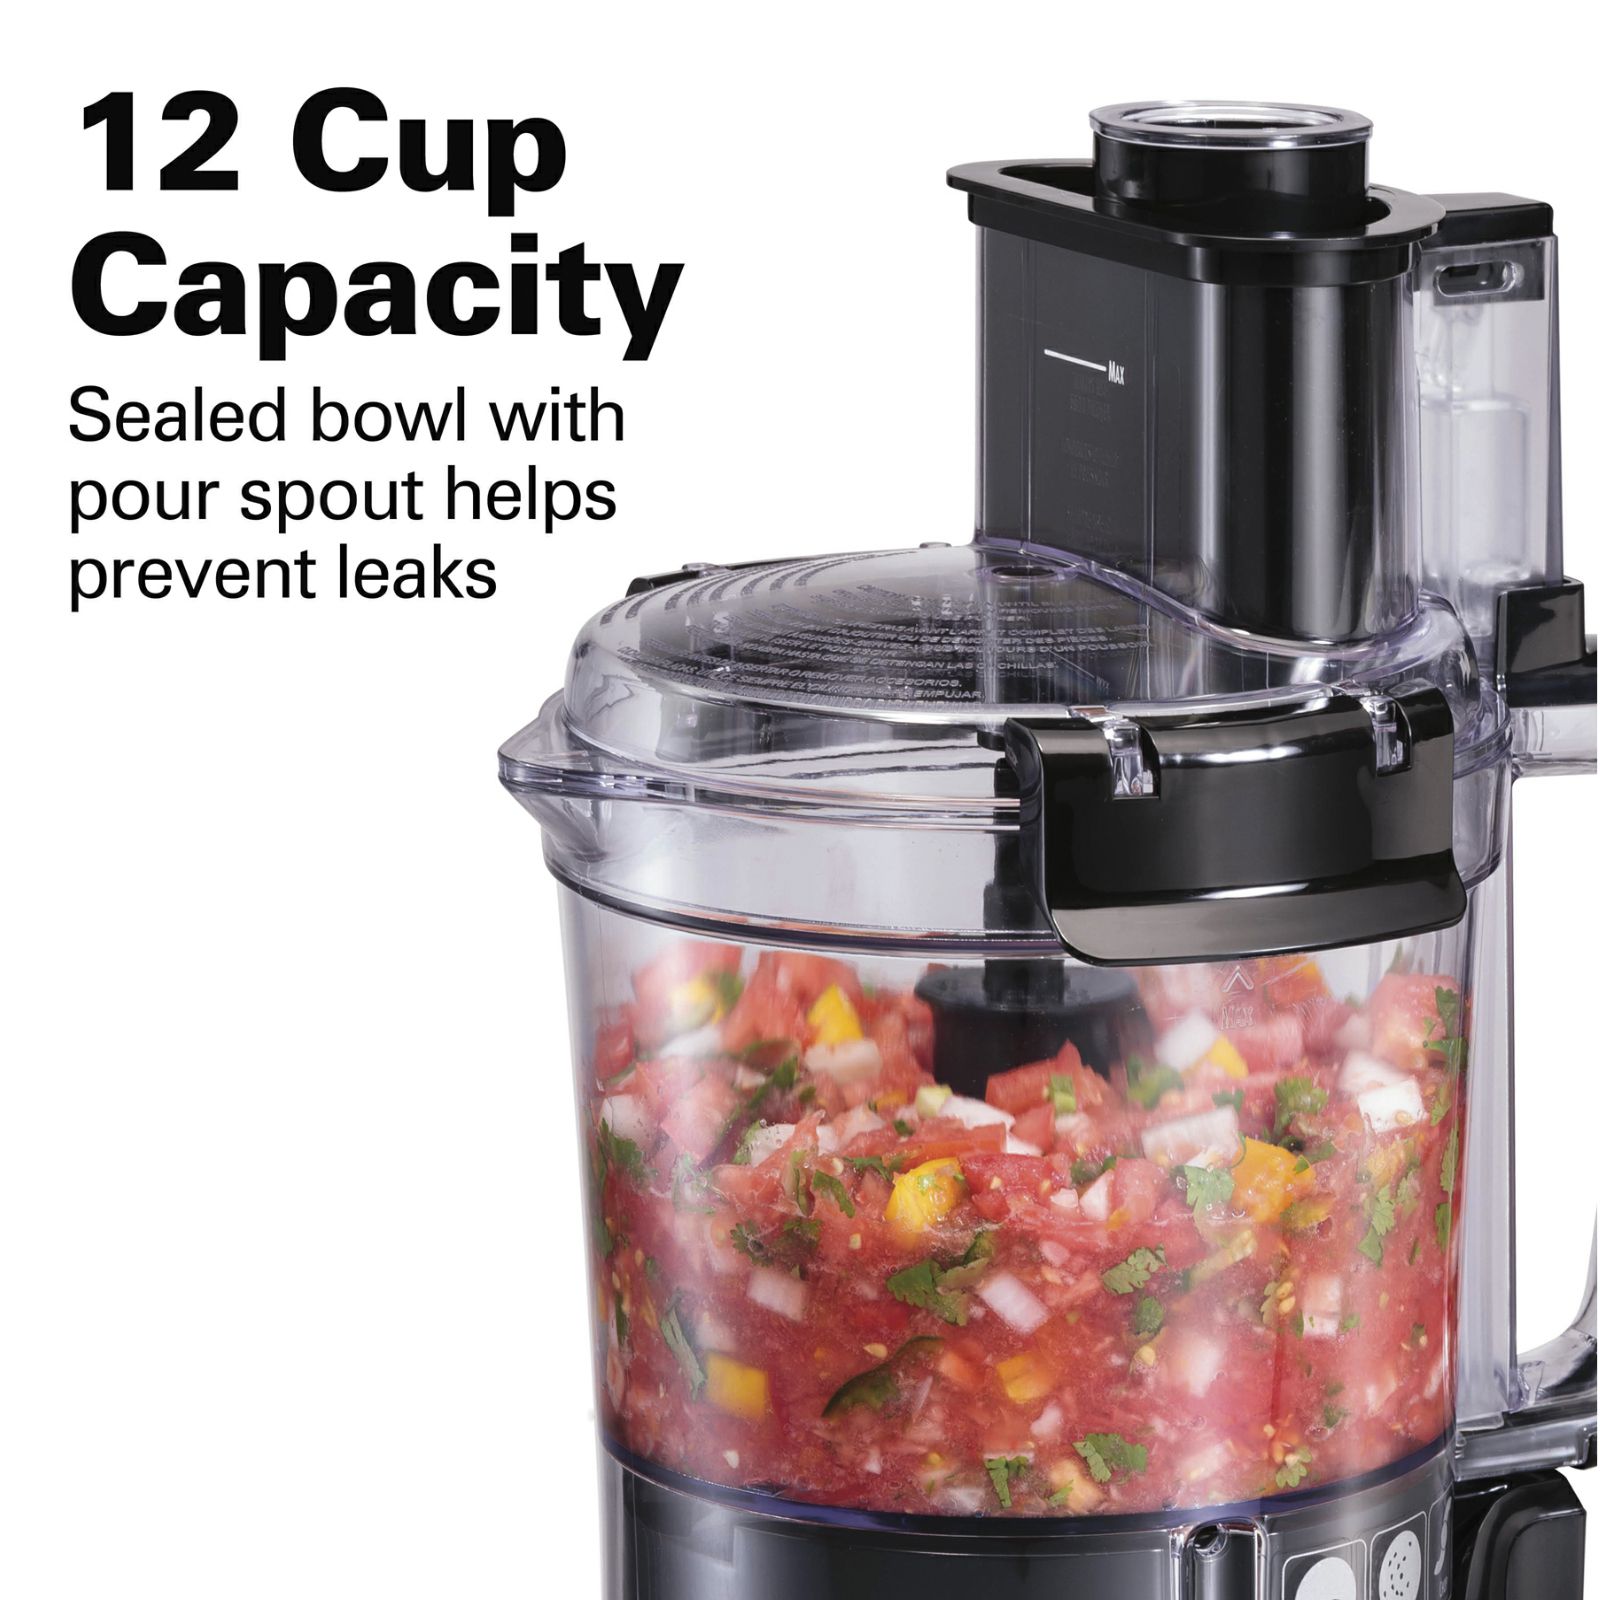 Hamilton Beach 12 Cup Stack And Snap Food Processor - Black